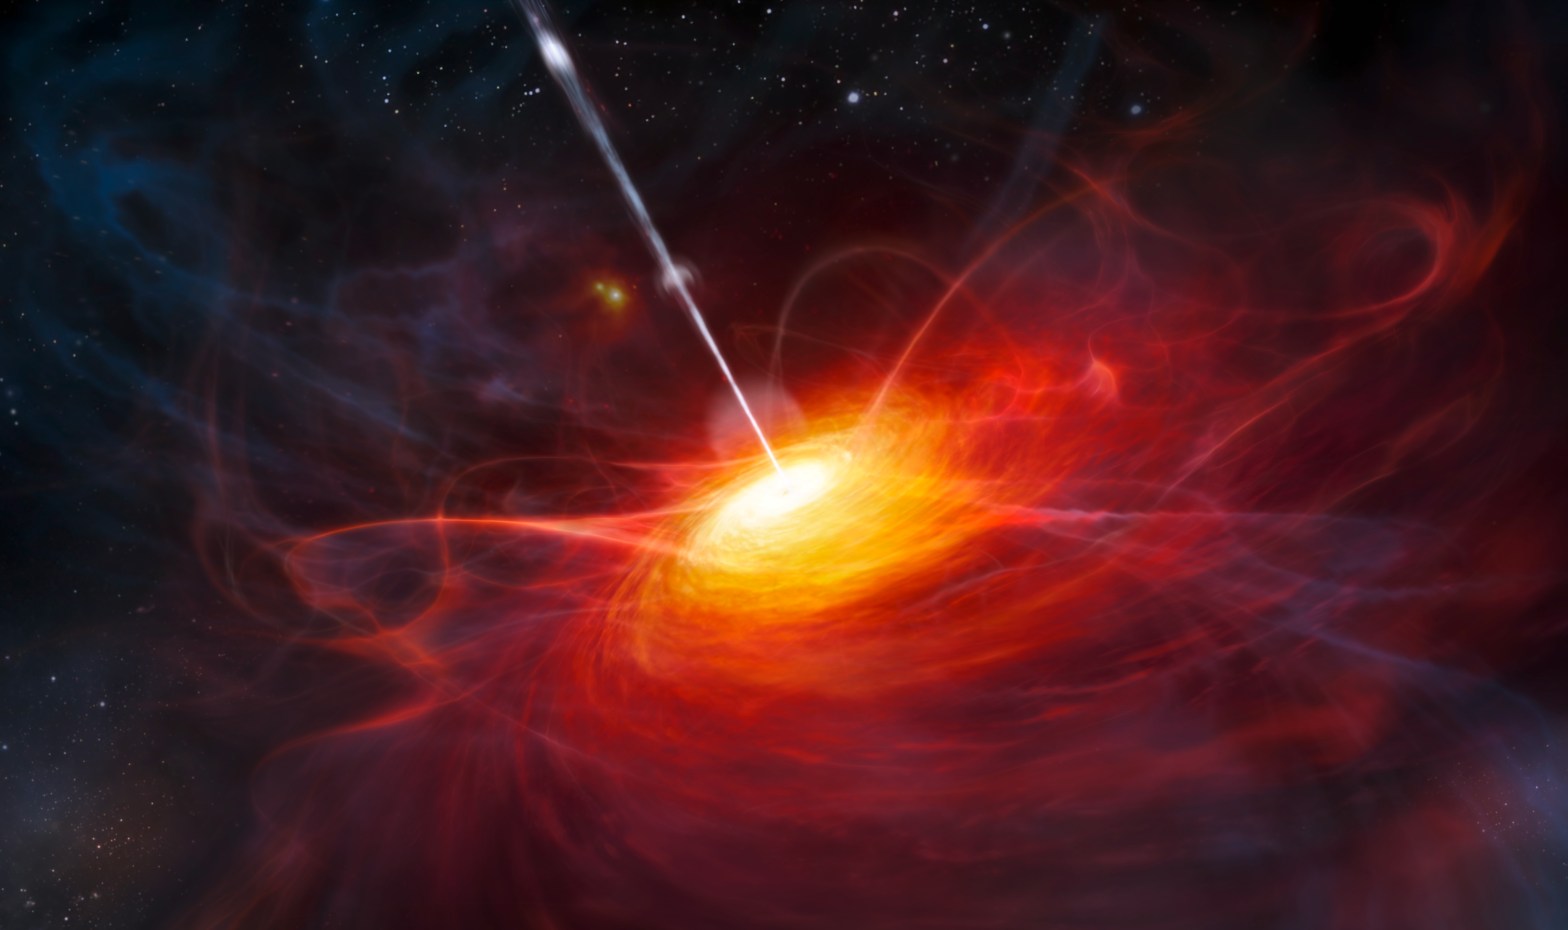 This artist’s impression shows how ULAS J1120+0641, a very distant quasar powered by a black hole with a mass two billion times that of the Sun, may have looked. This quasar is the most distant yet found and is seen as it was just 770 million years after the Big Bang. This object is by far the brightest object yet discovered in the early Universe.